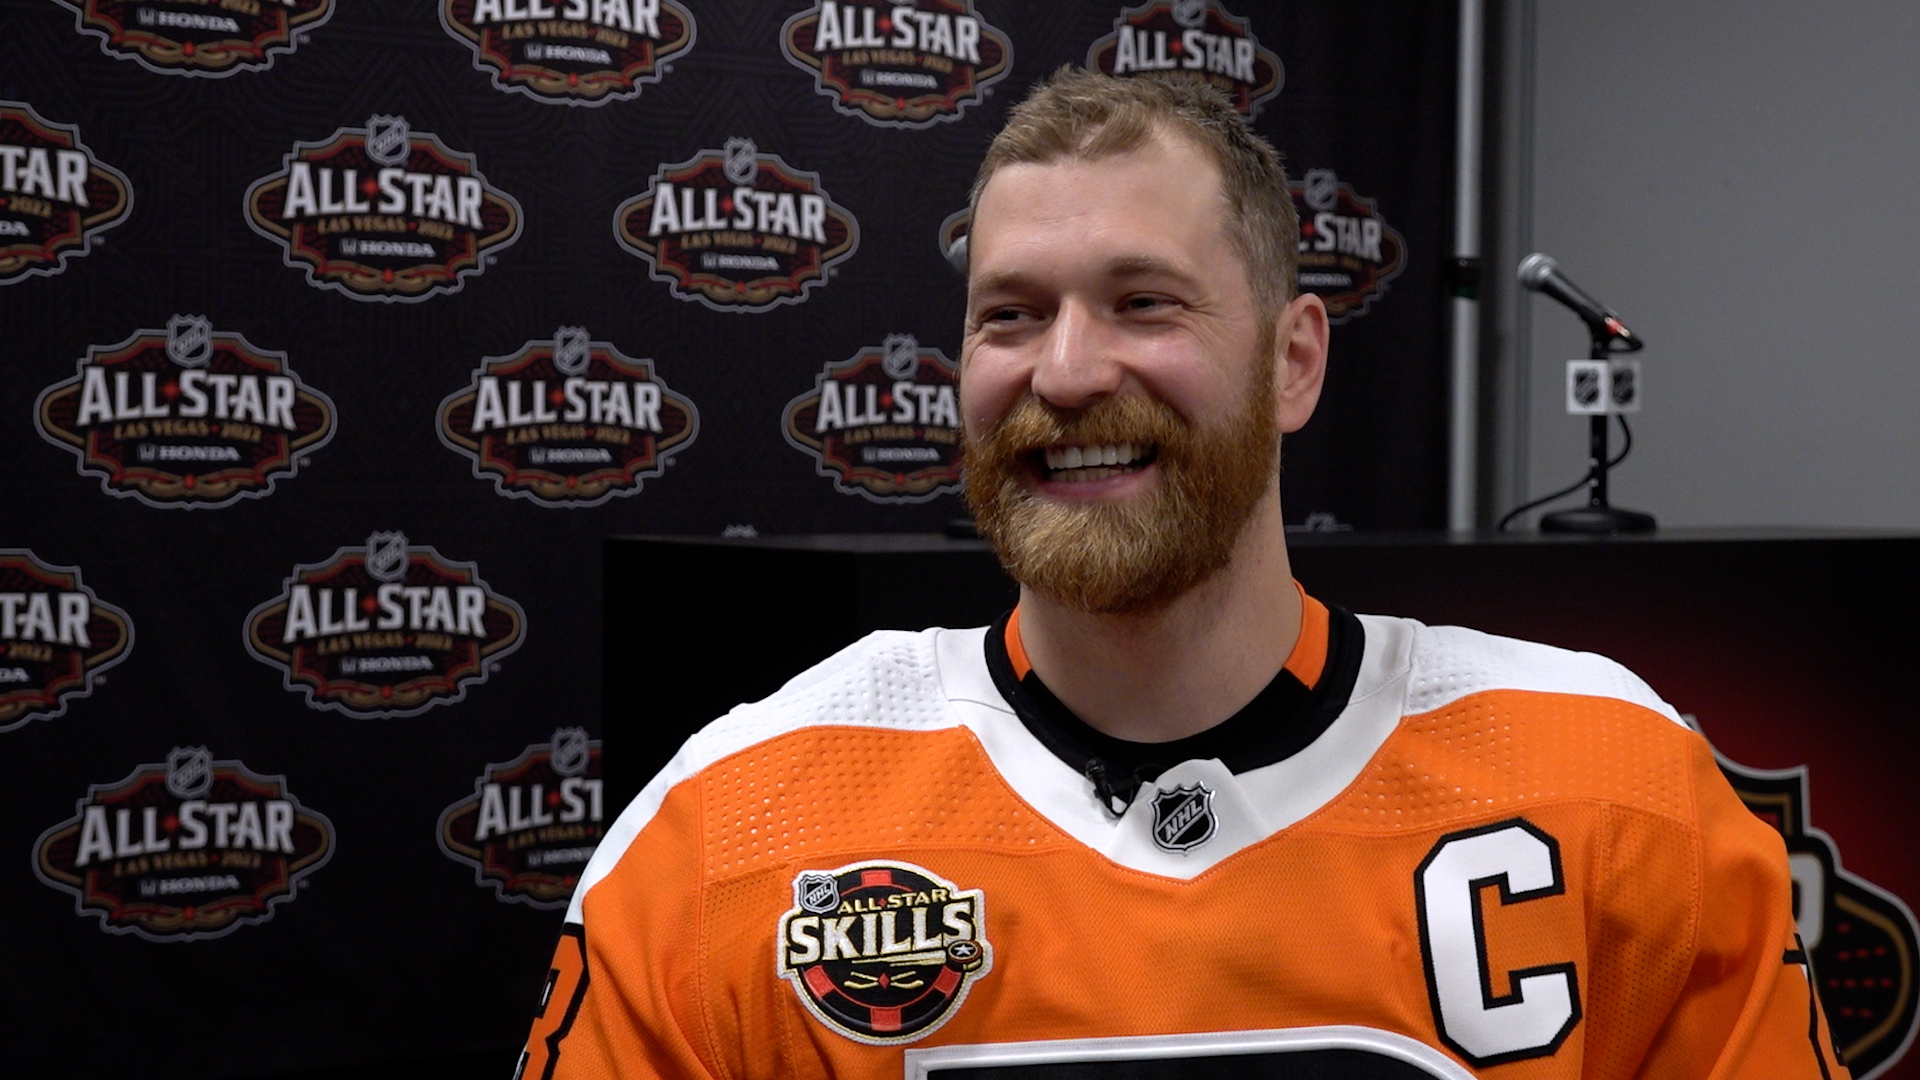 Metropolitan Division wins All-Star Game final, 5-3, against Central  Division, Claude Giroux wins MVP